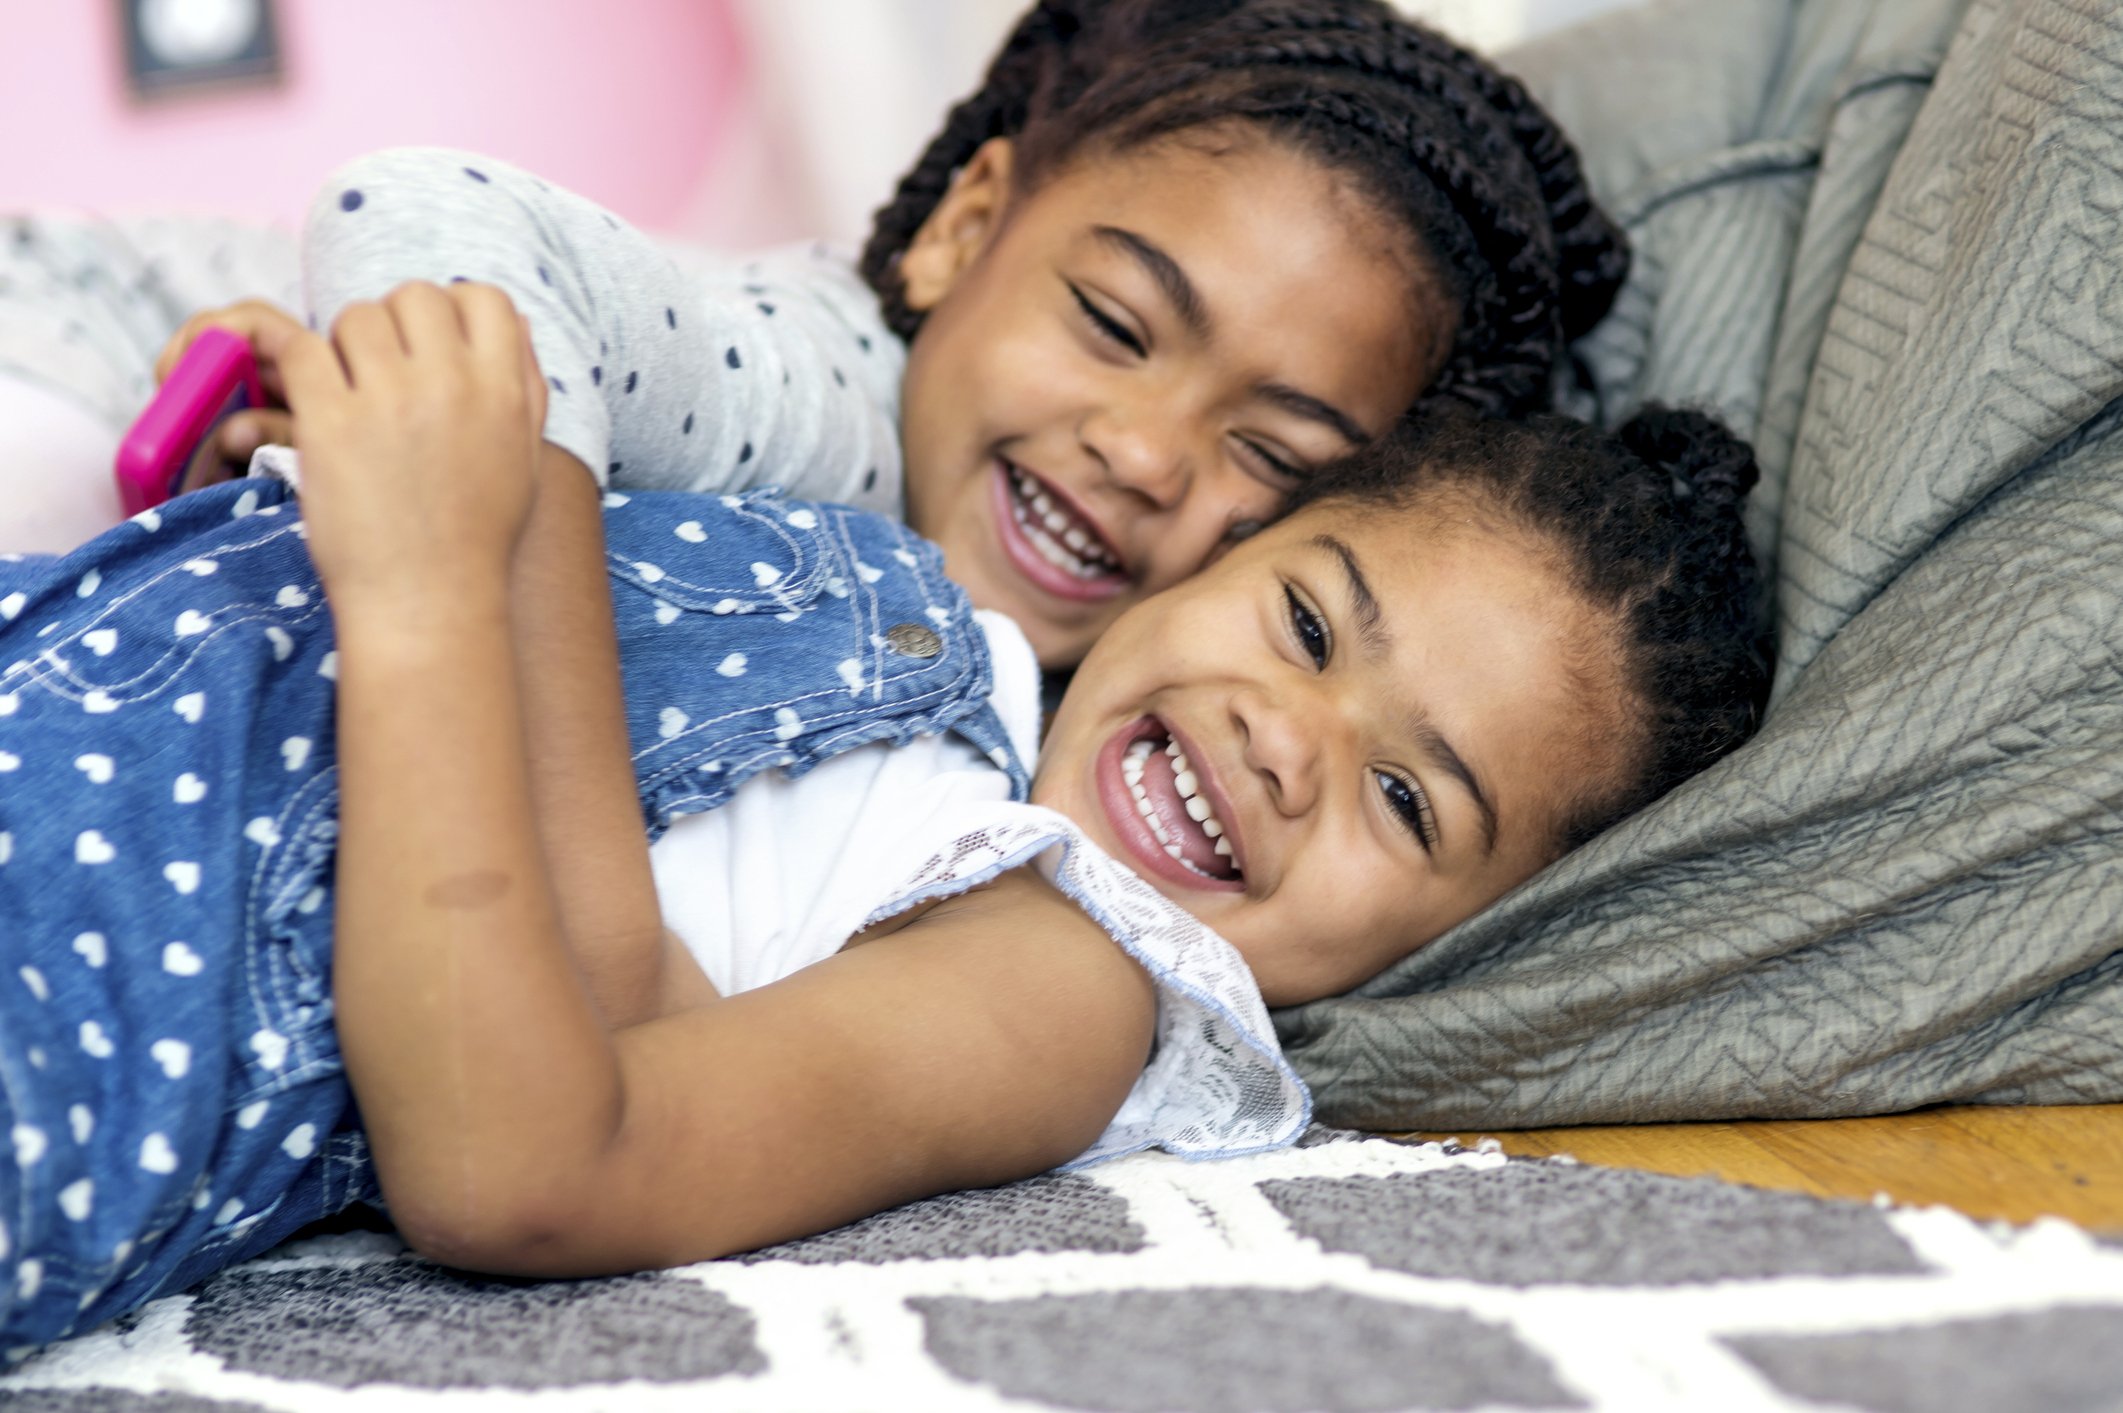 Cute African American girl tickling younger sister on the floor | Photo: Getty Images